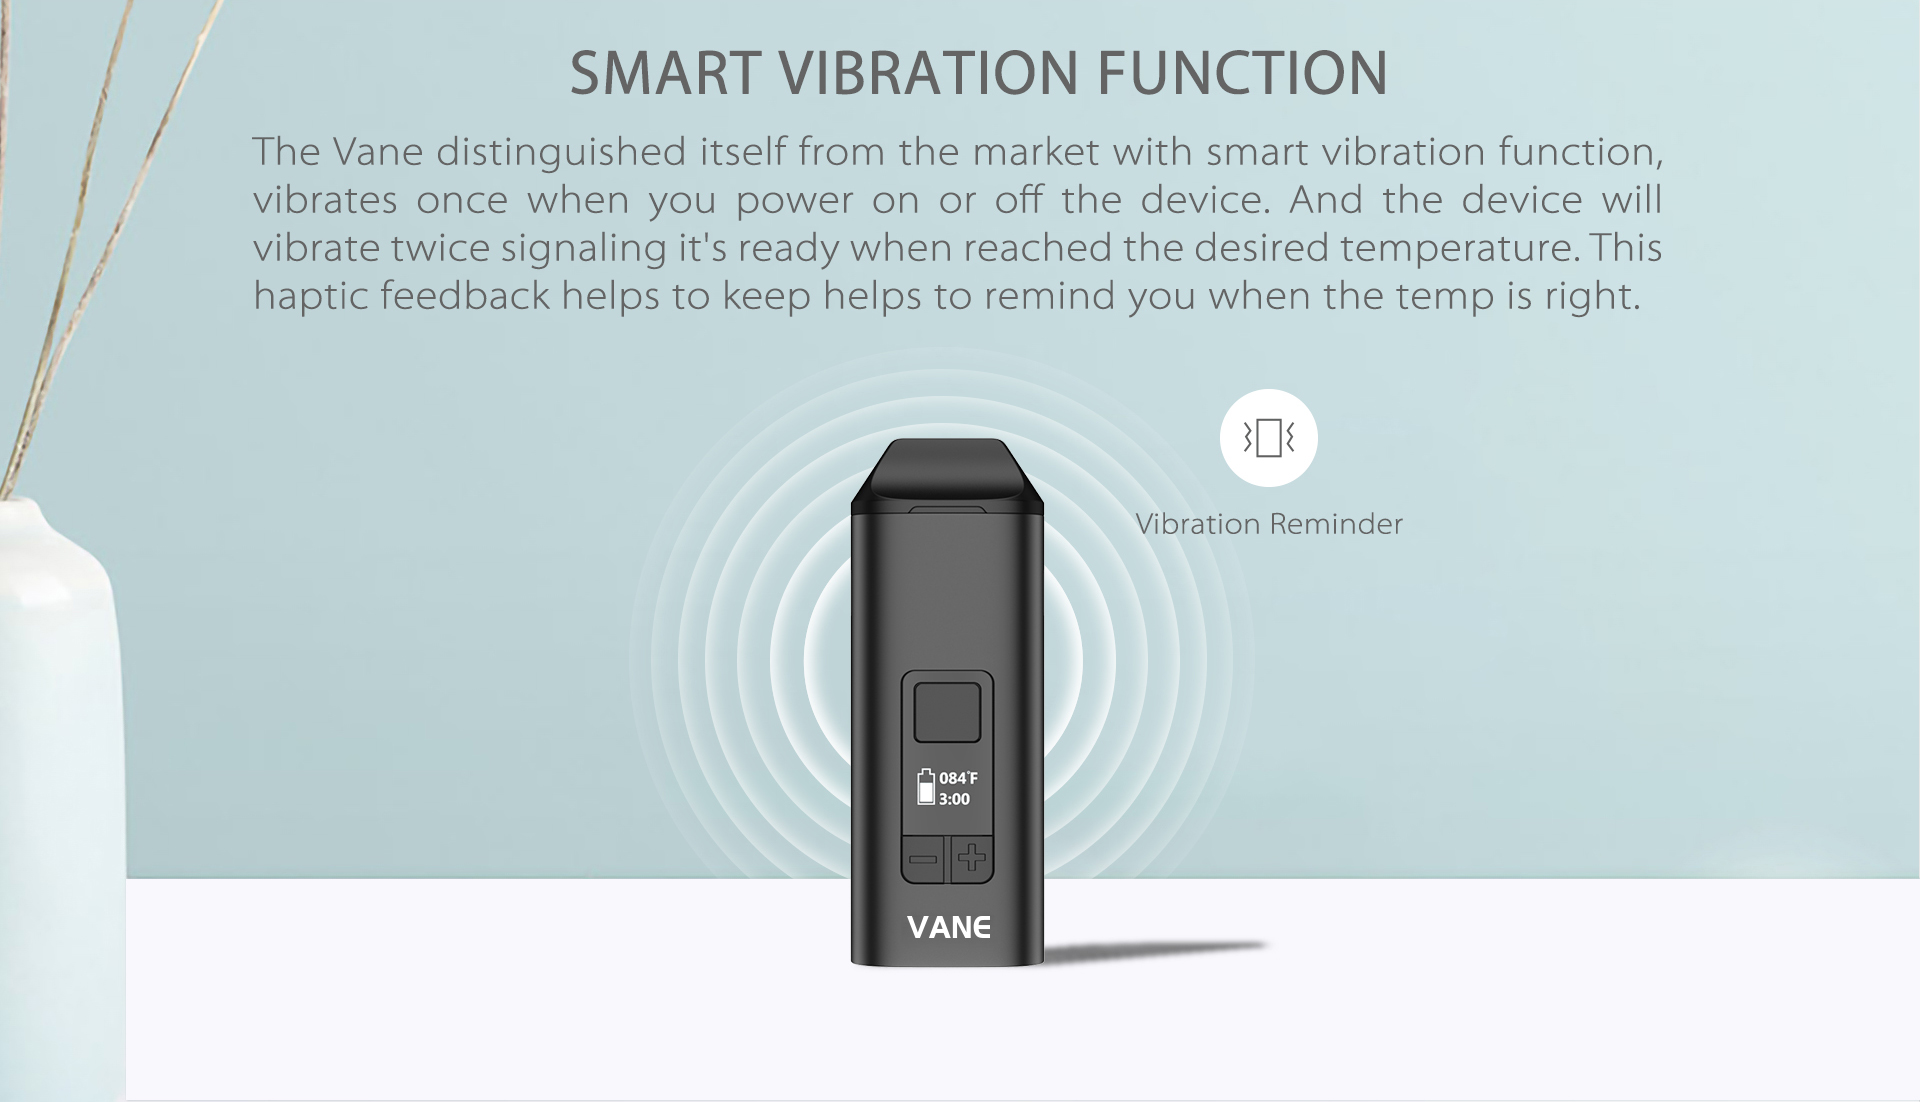 Yocan Vane Dry Vaporizer comes with smart vibration function